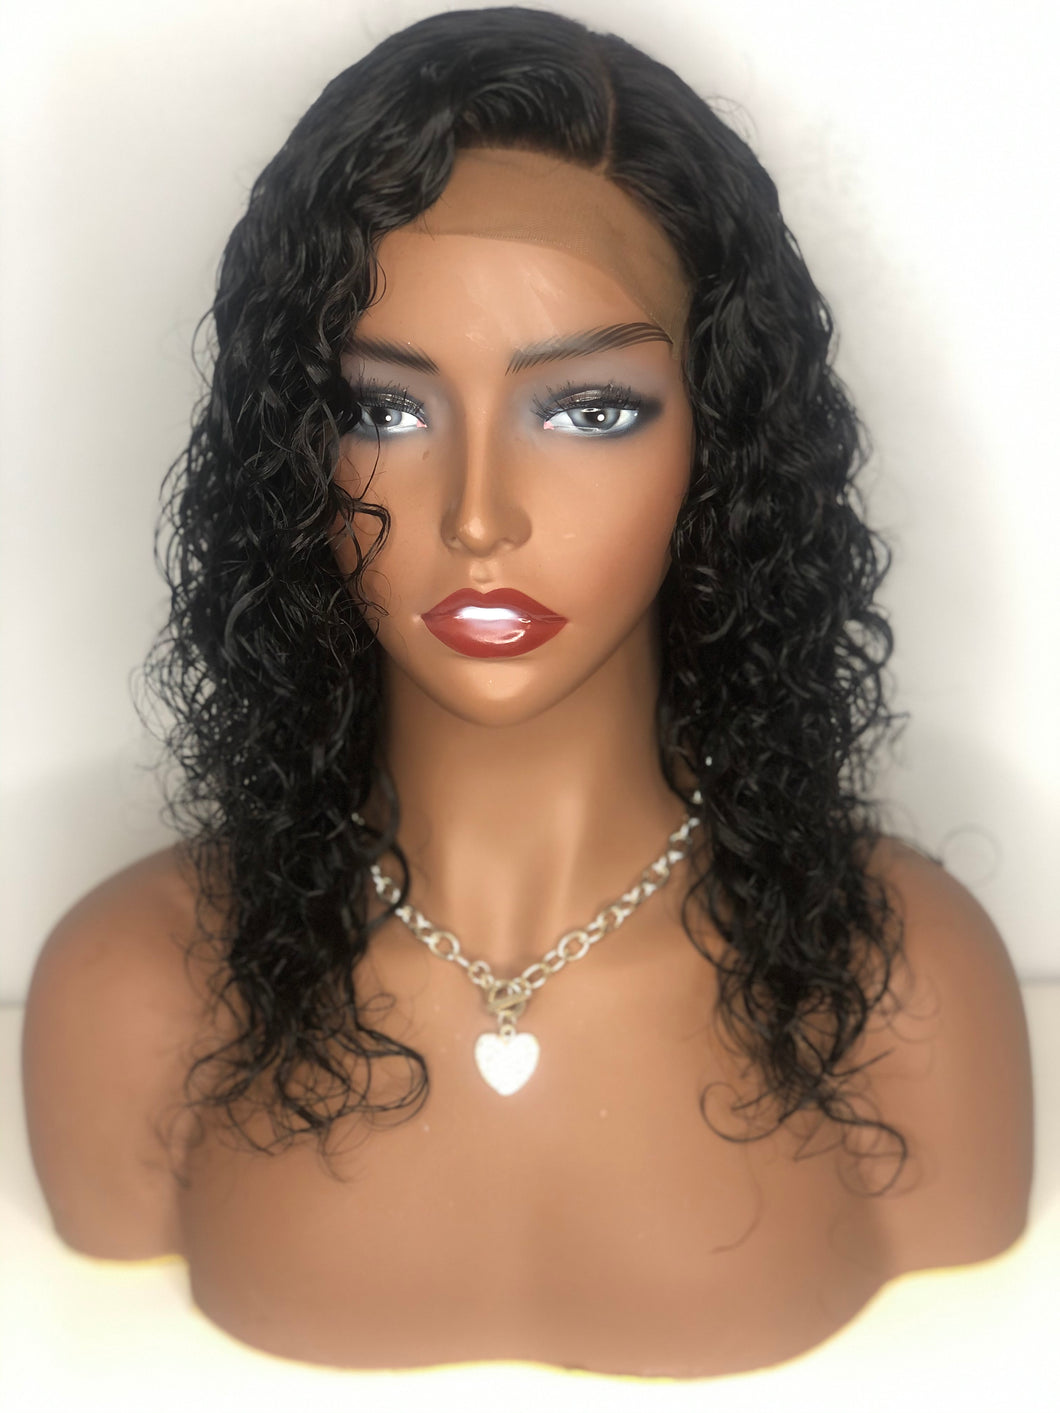 Lace Closure Wig-Indian Curly